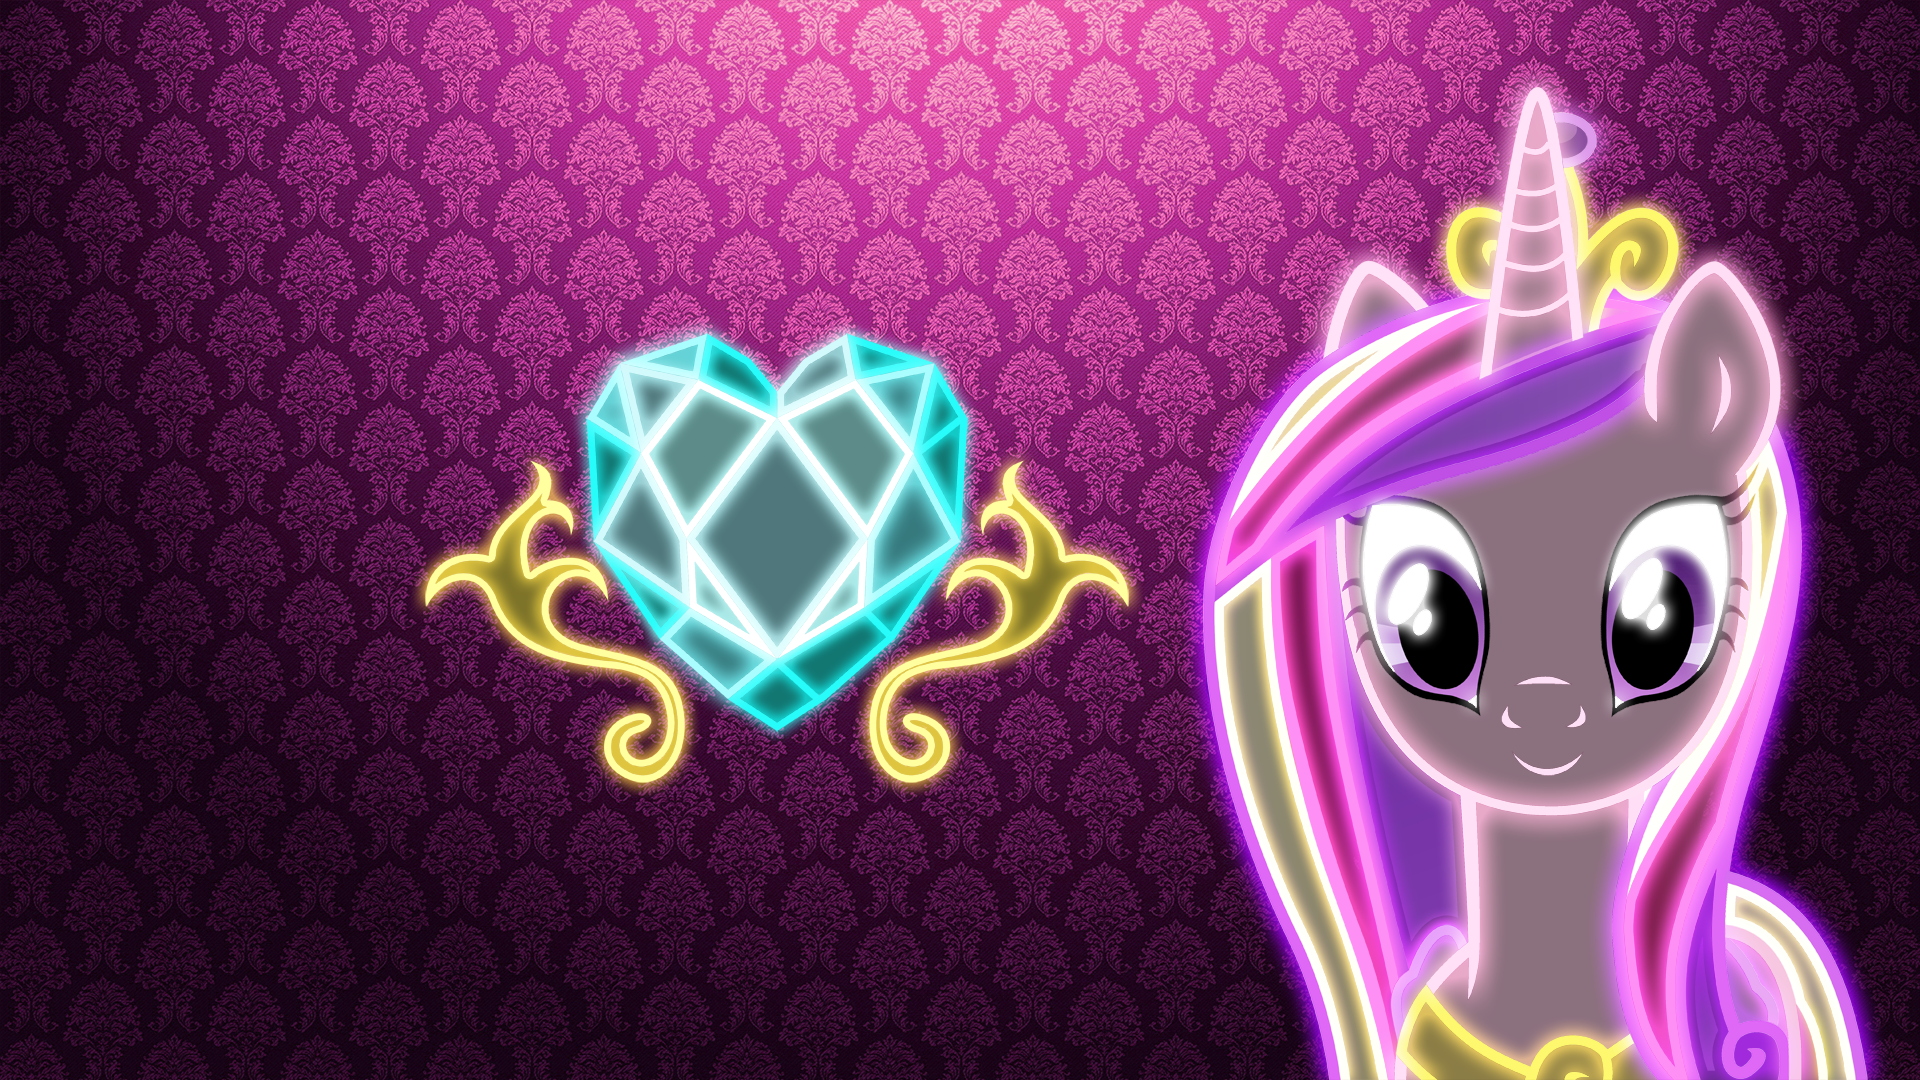 Neon Princess Cadance Wallpaper by ultimateultimate